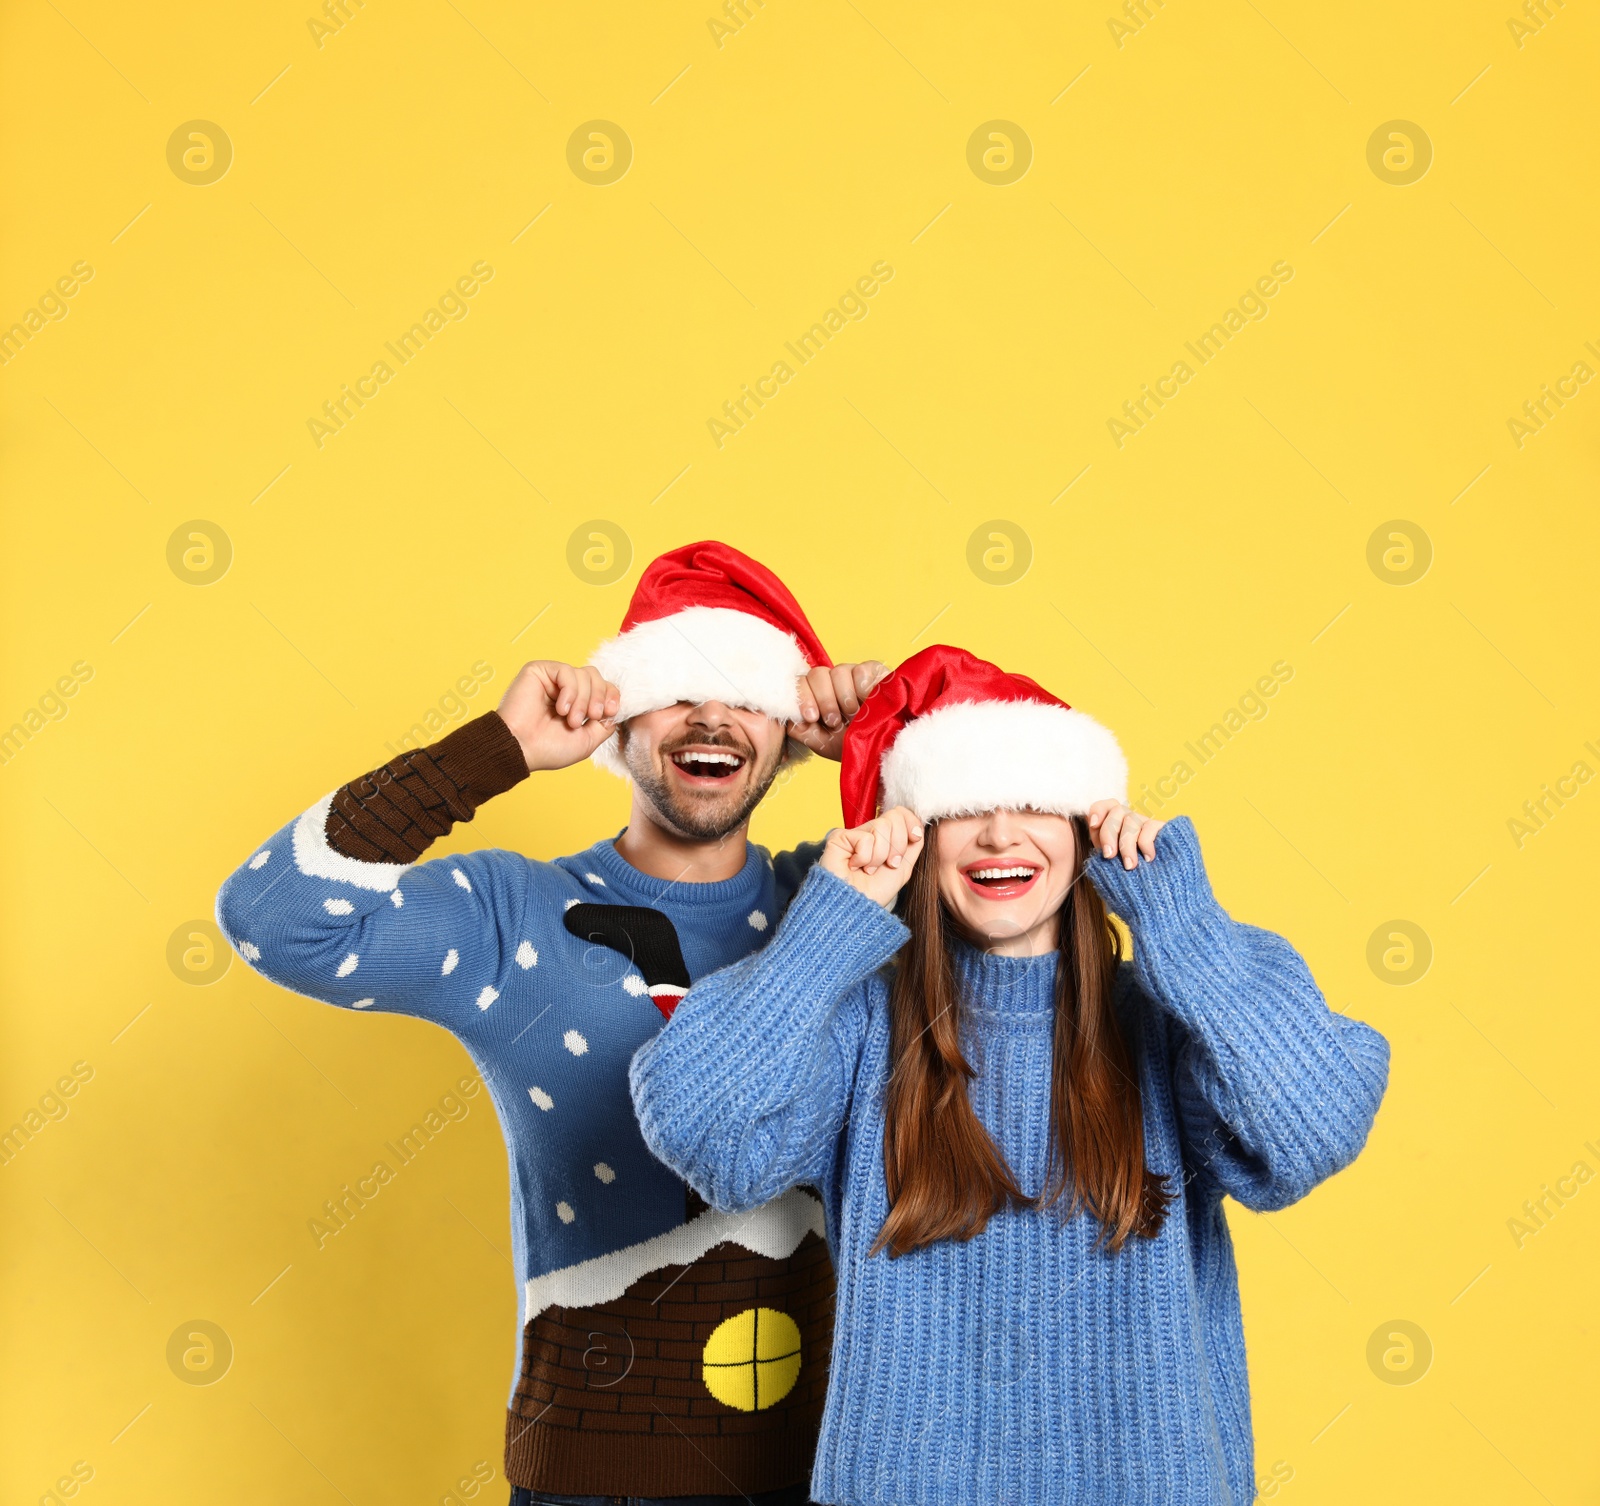 Photo of Couple wearing Christmas sweaters and Santa hats on yellow background